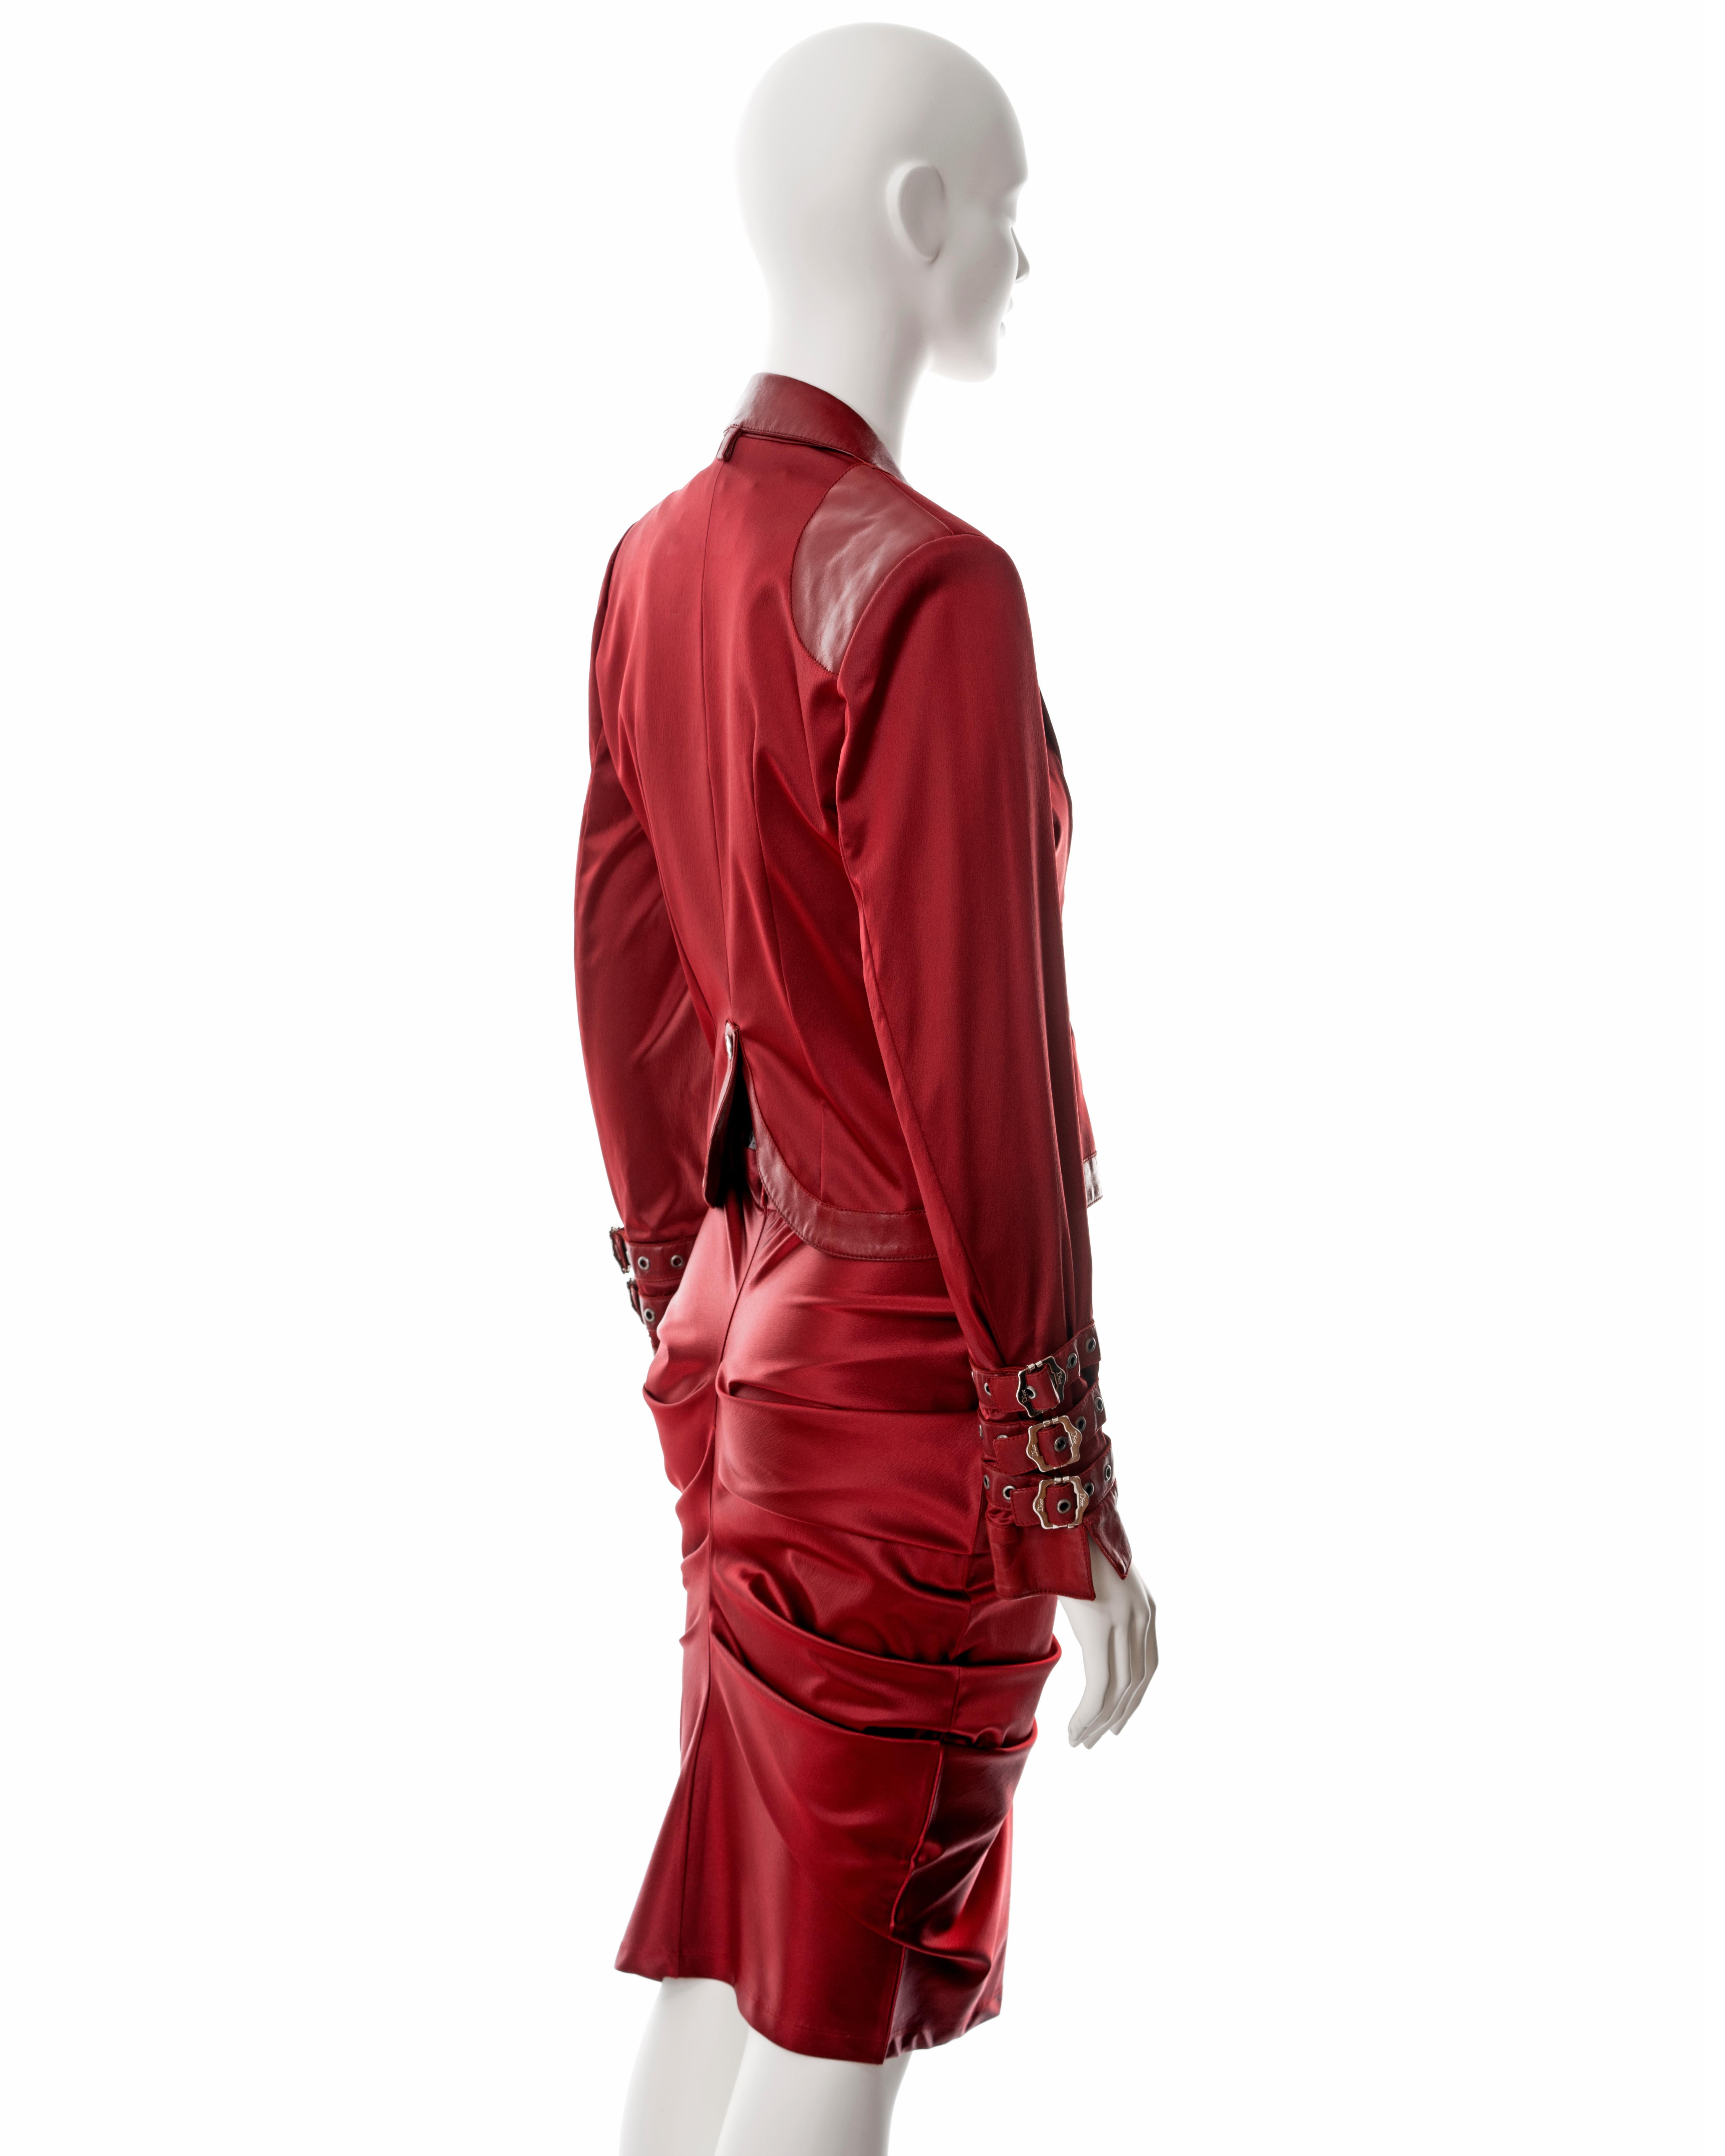 Christian Dior by John Galliano red satin and leather skirt suit, fw 2003 For Sale 2